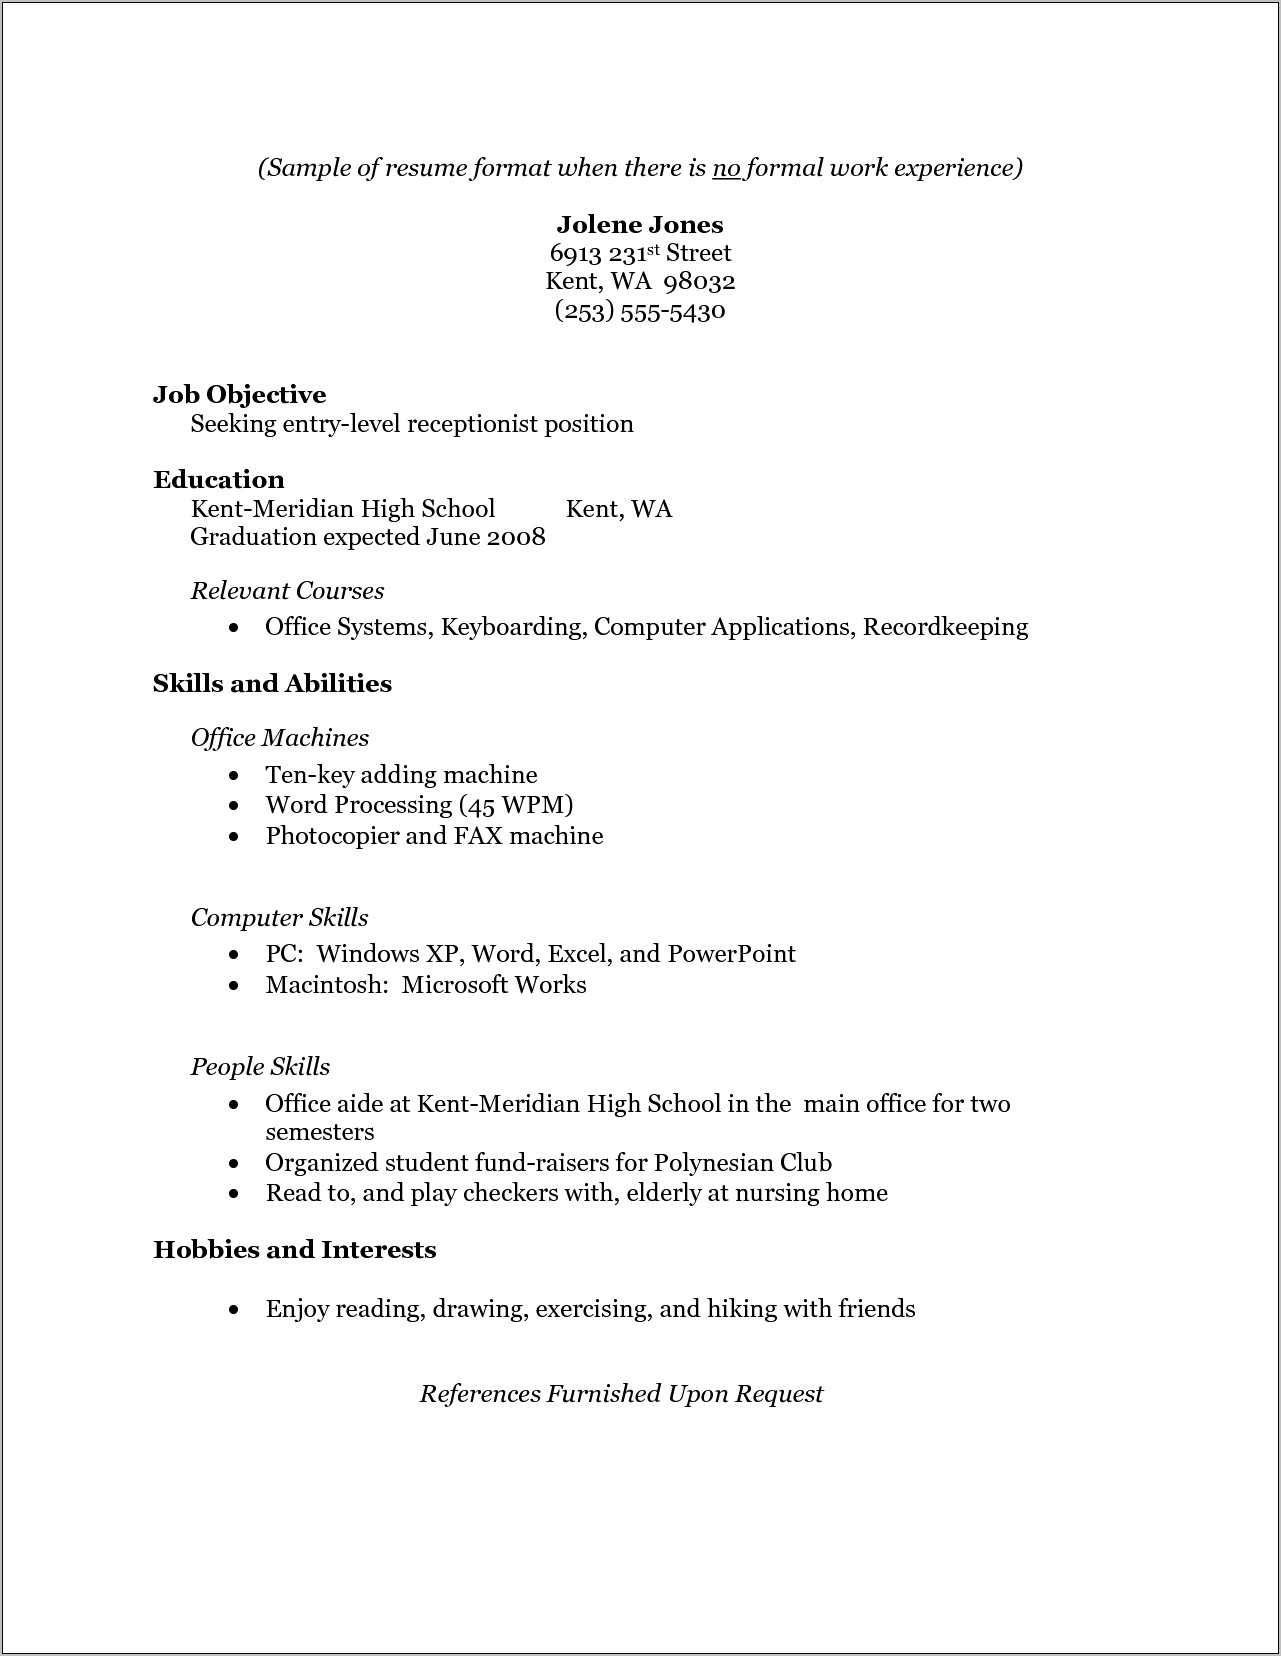 Resume Objective With Little Experience Sample